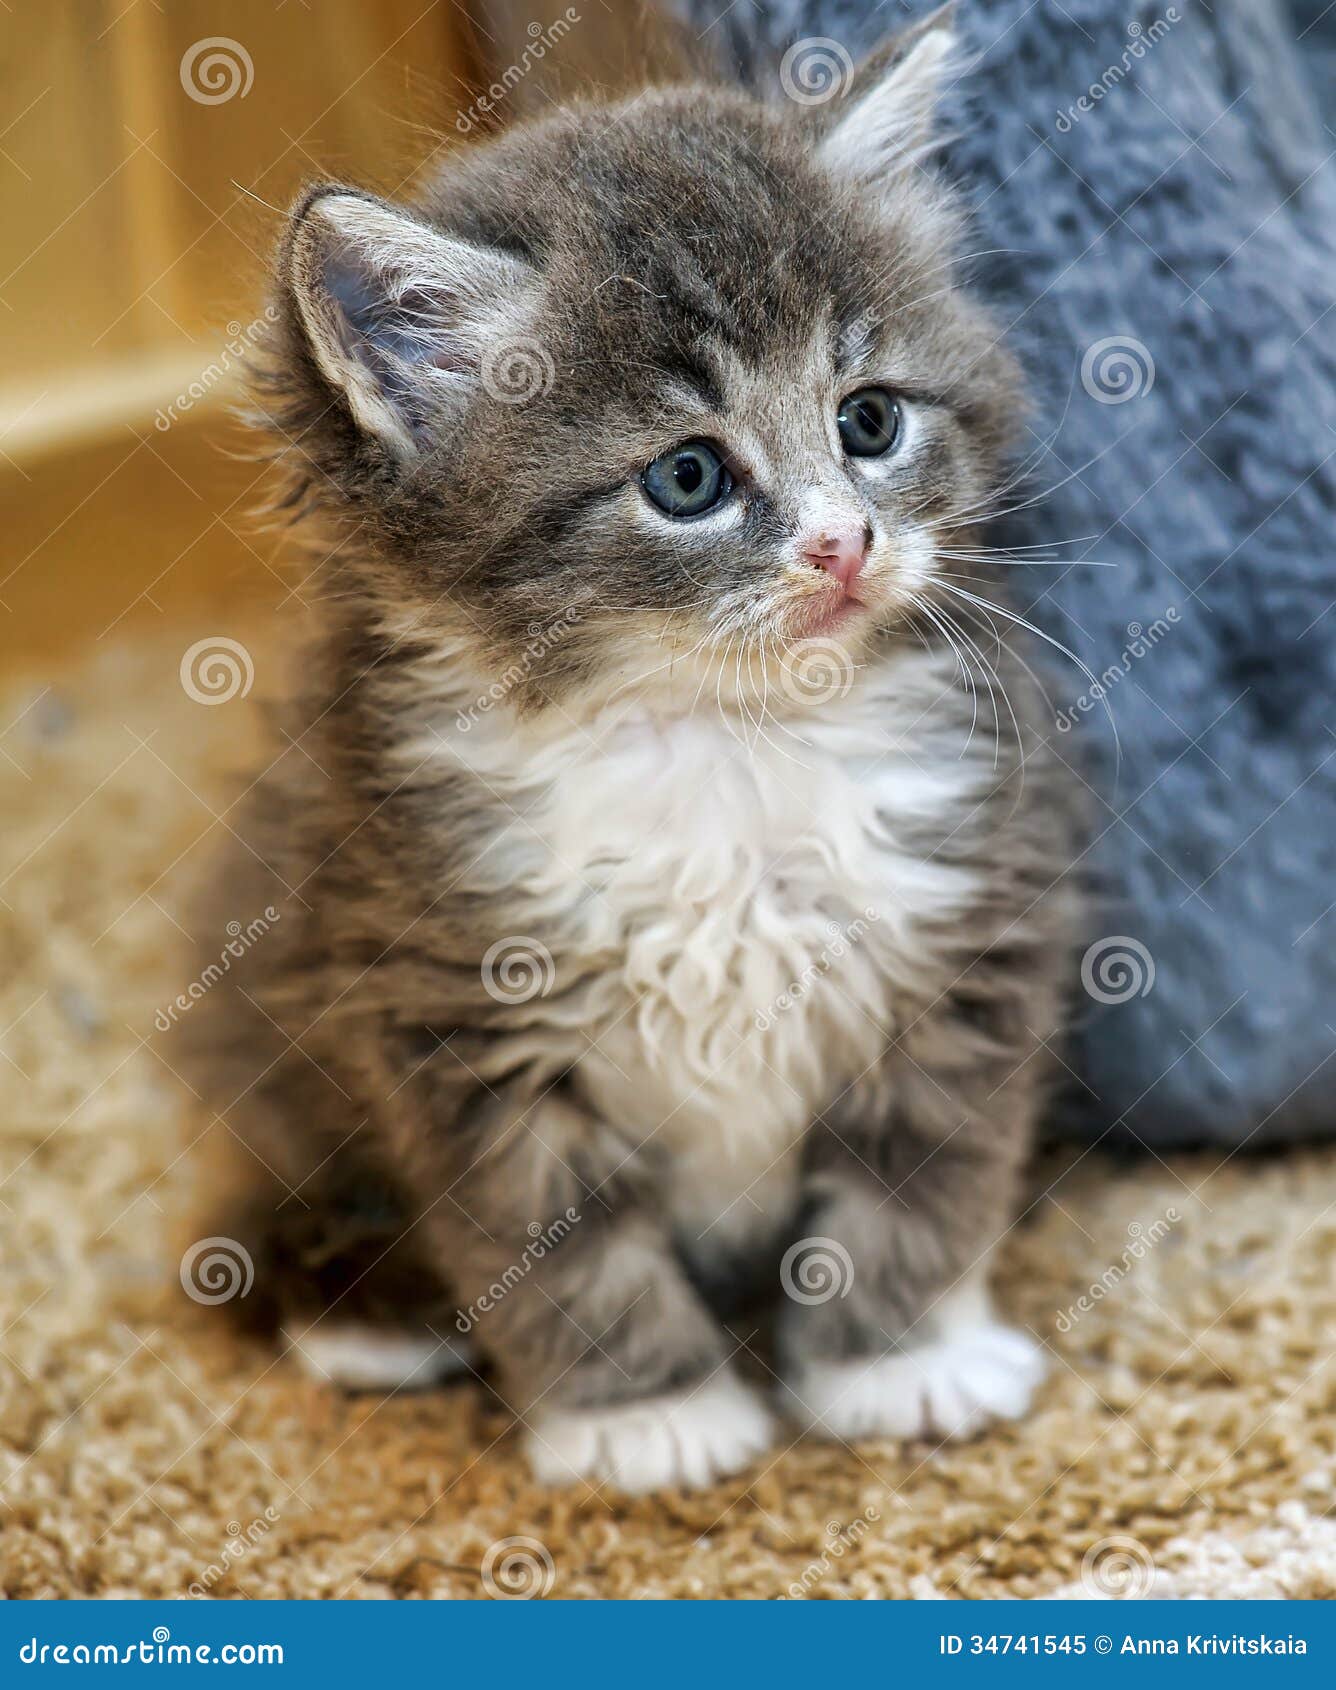 Fluffy Gray And White Kitten Stock Image - Image Of Grooming, Background:  34741545